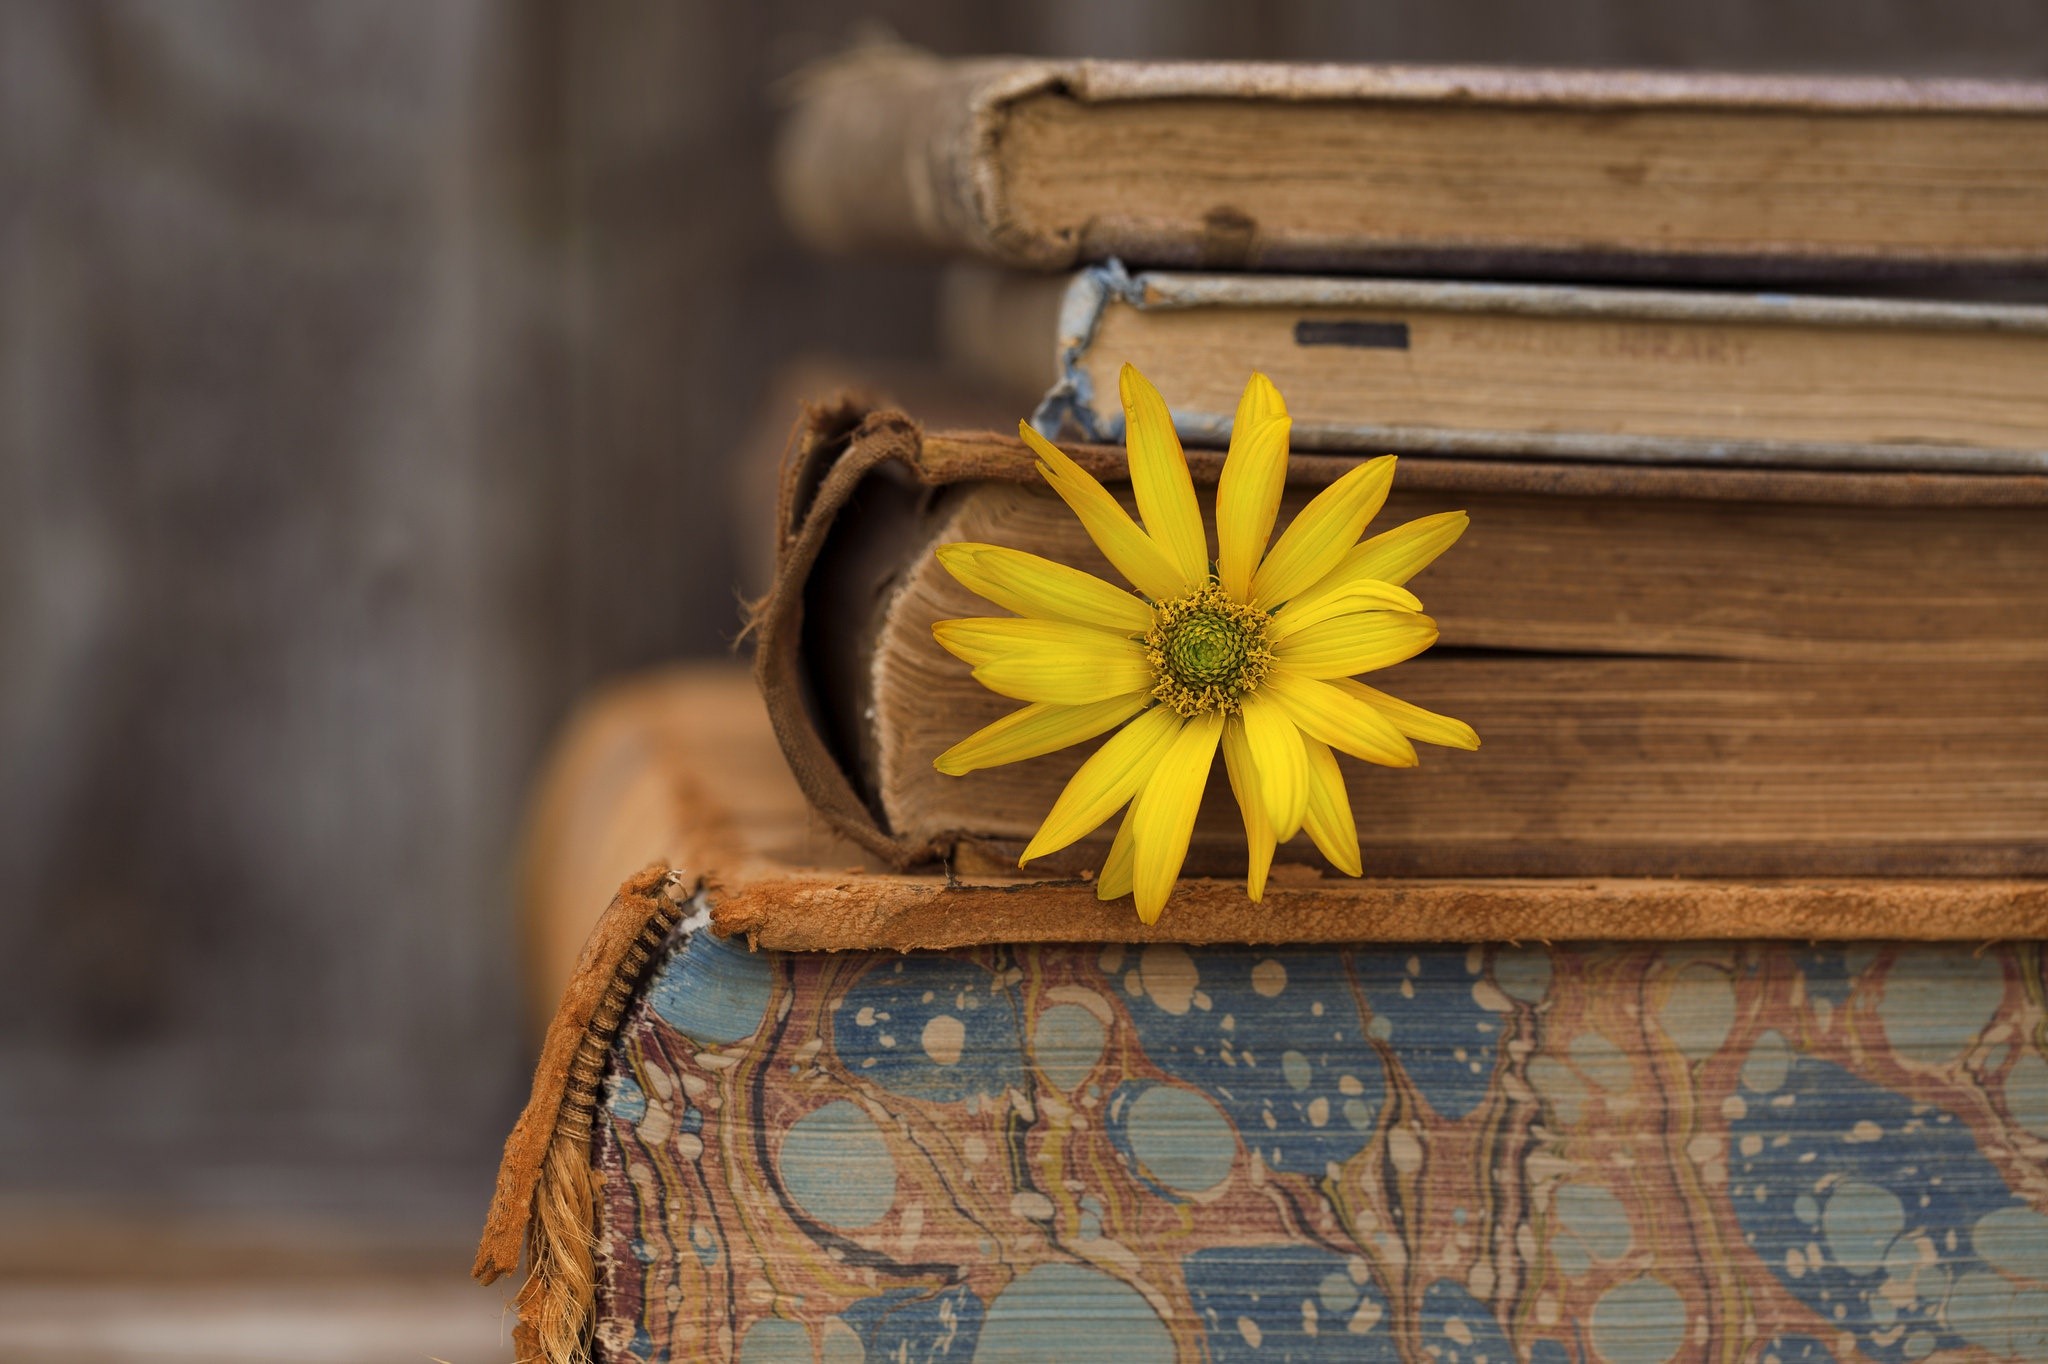 Old books with a yellow flower in the foot of the textblock